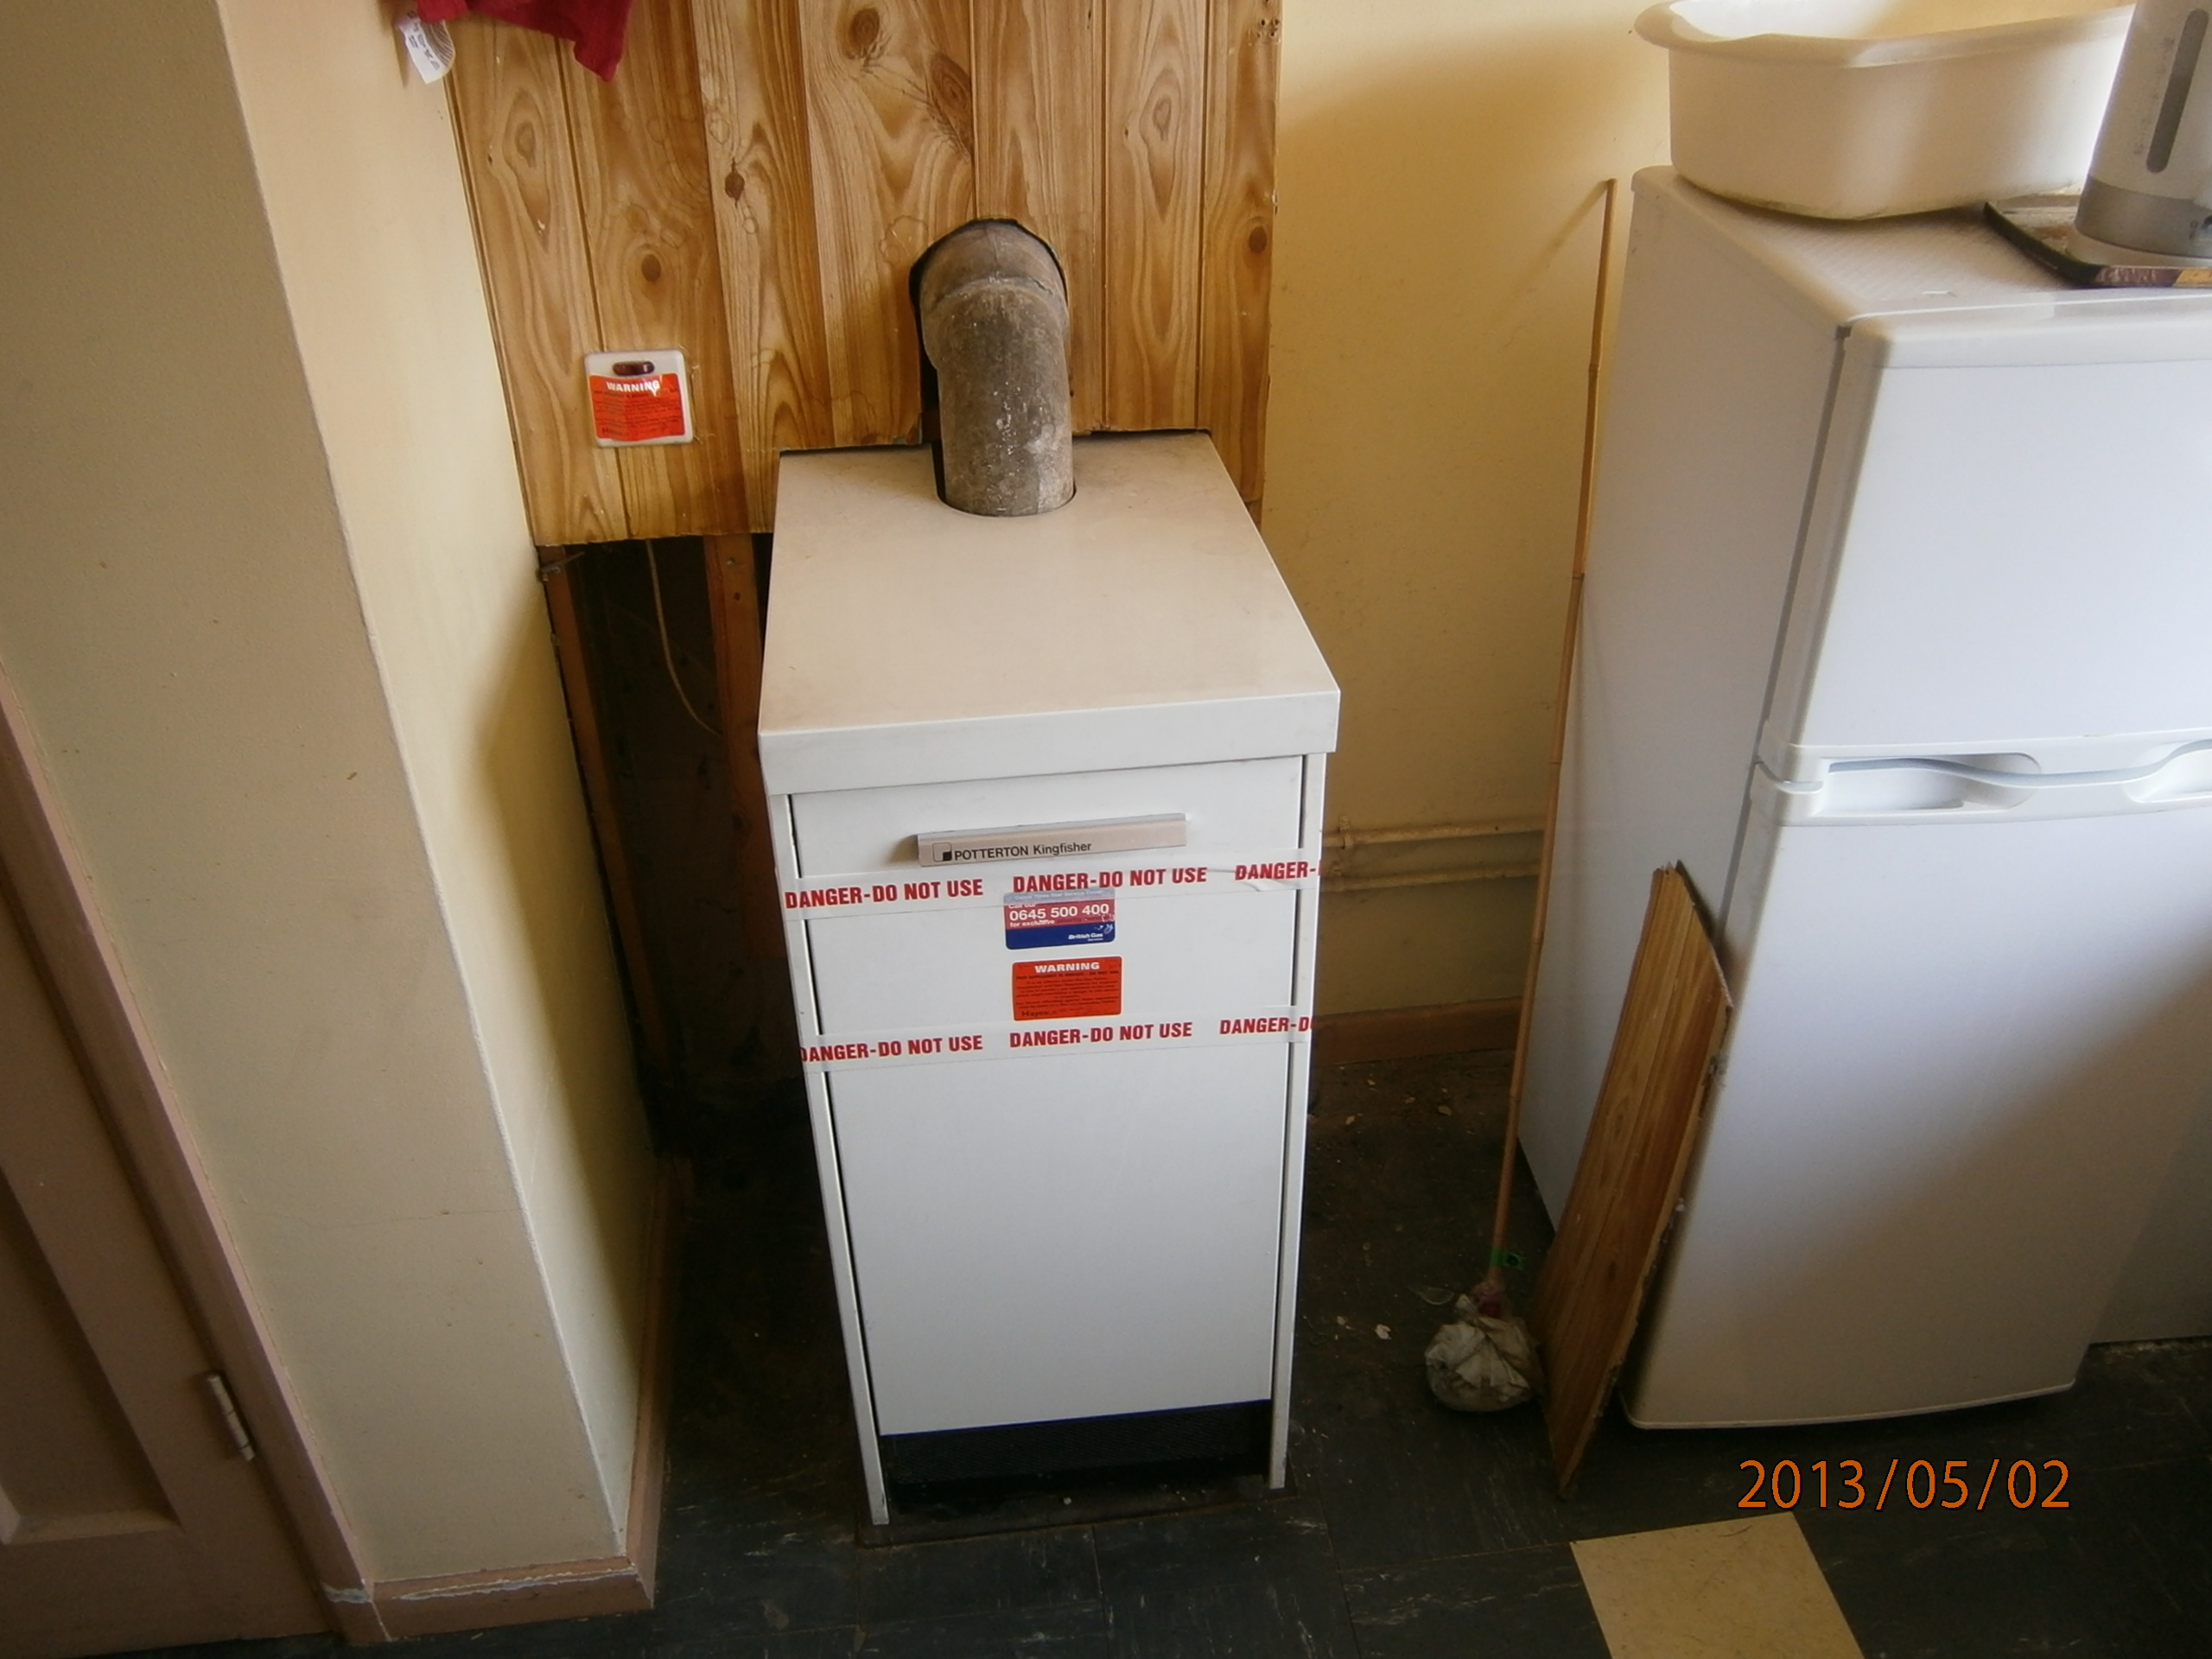 Suspect Central Heating Boiler